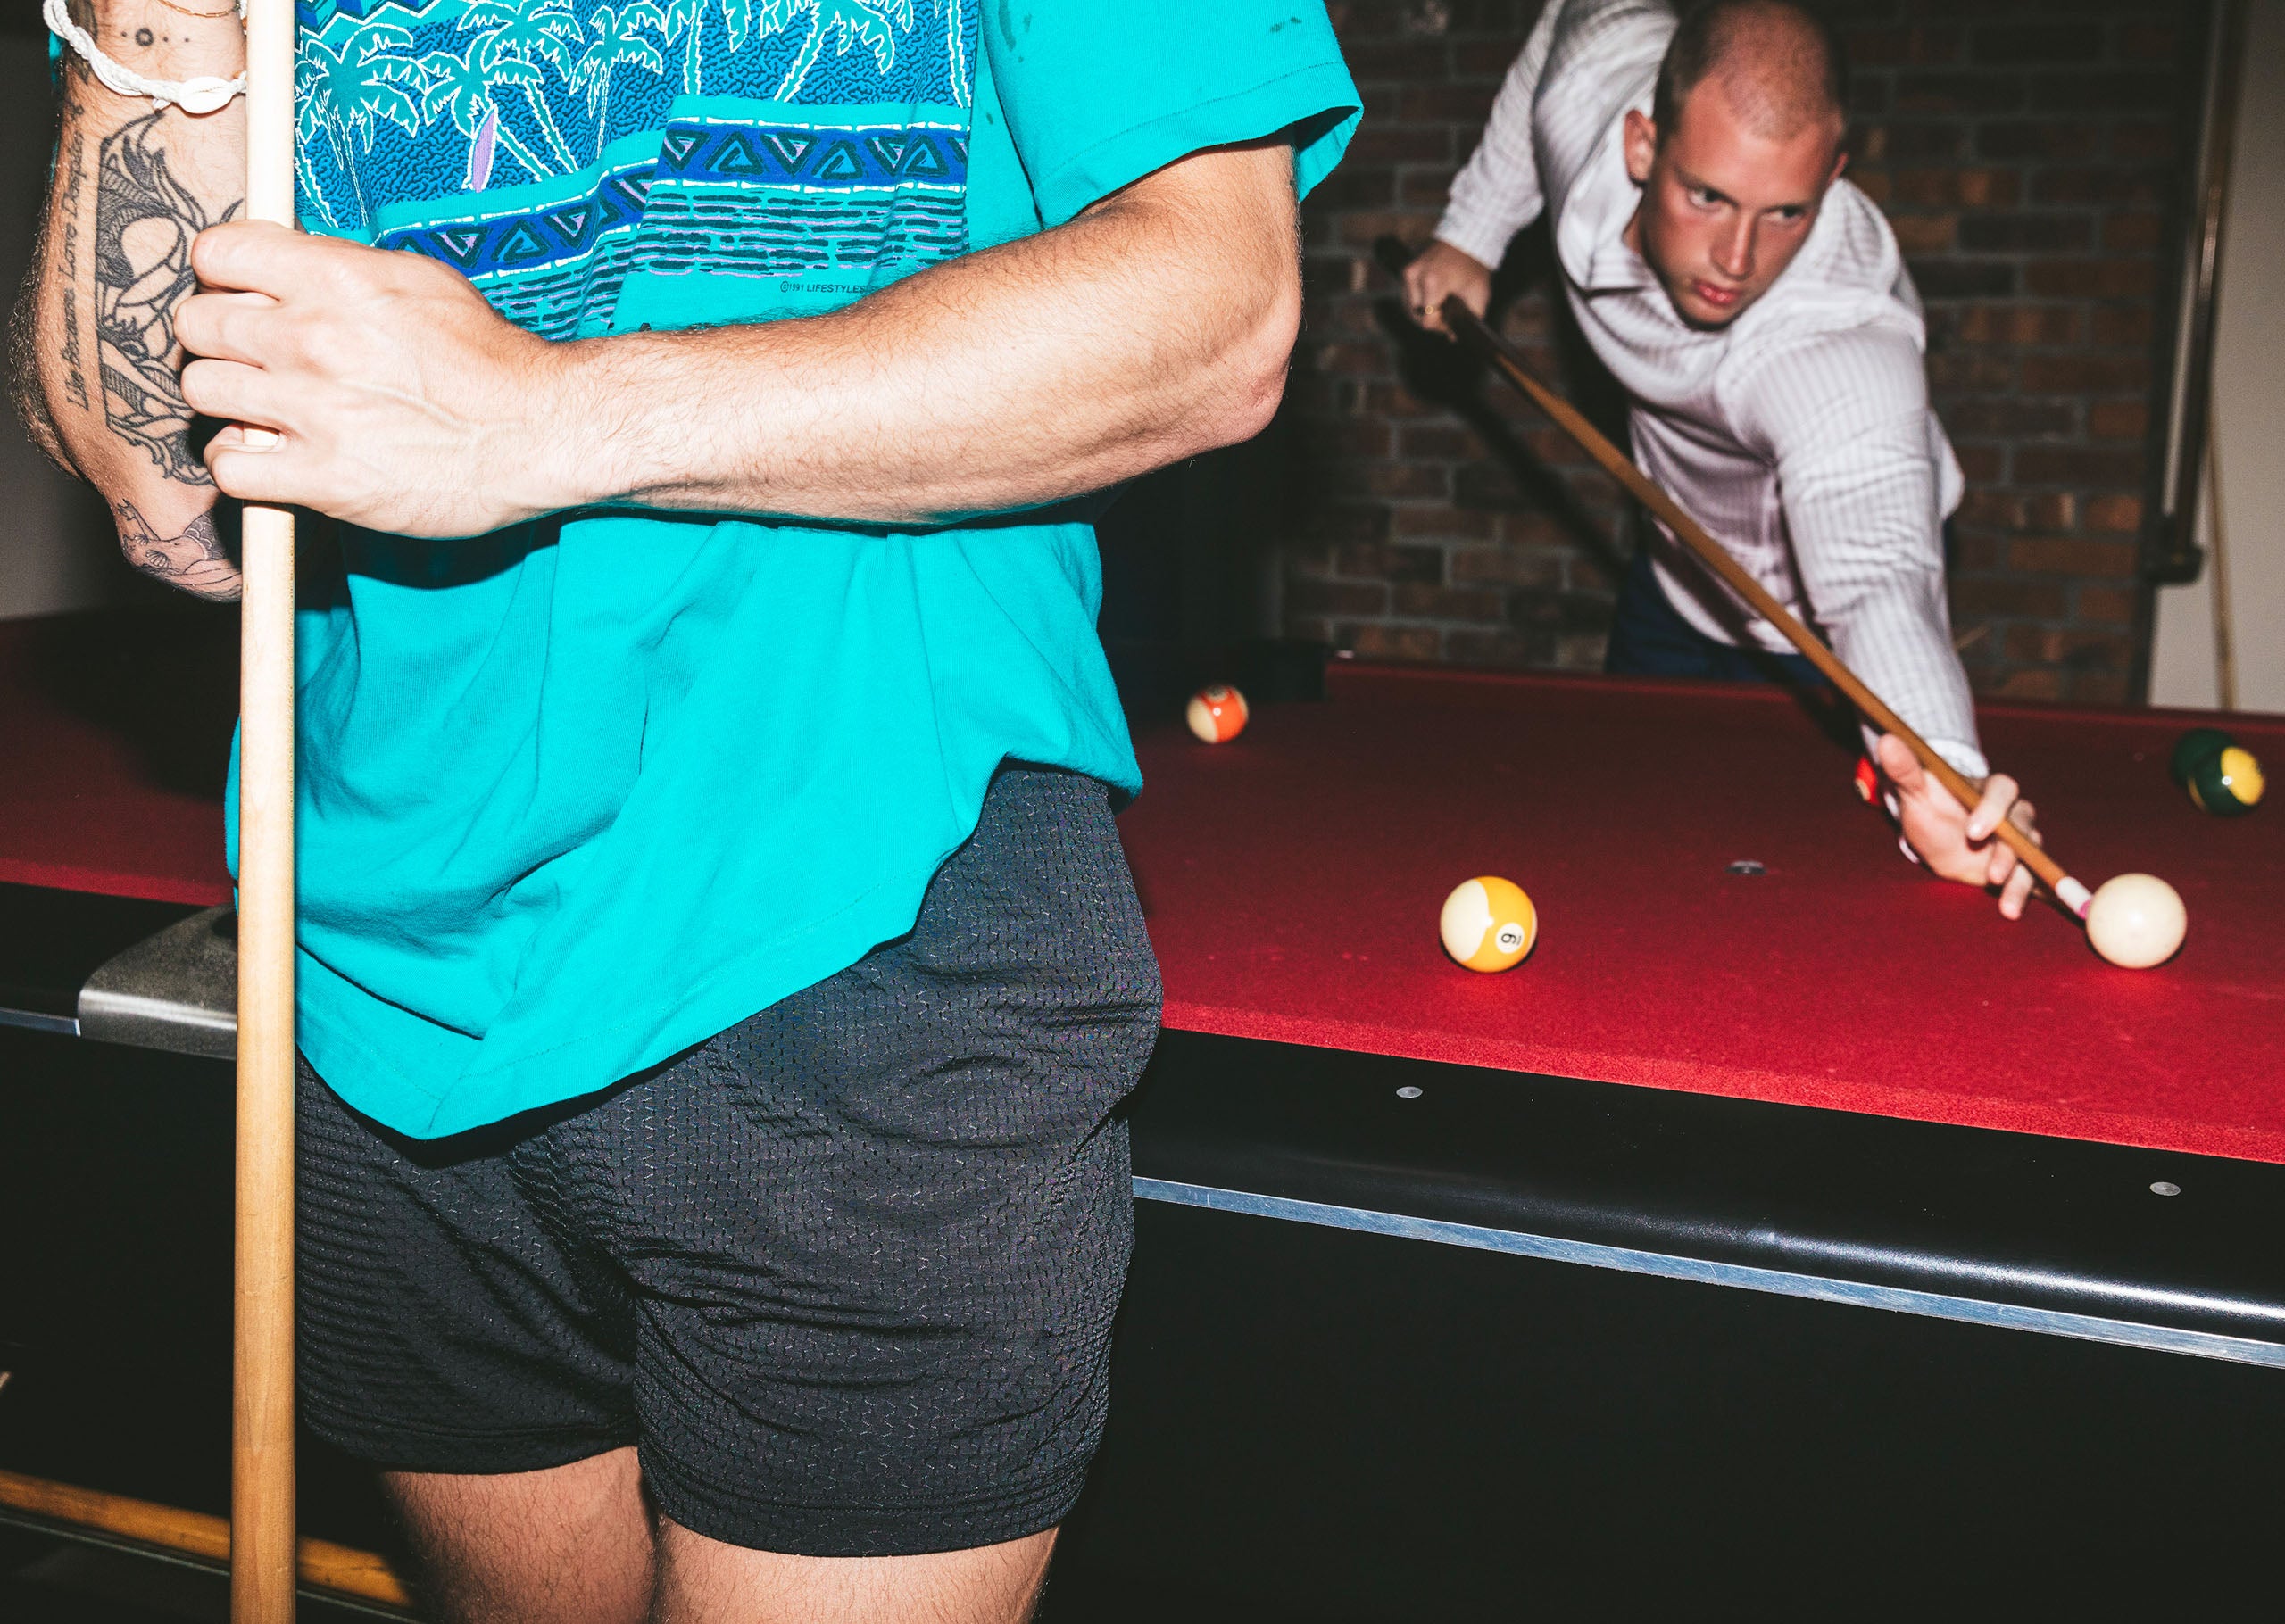 Two men playing pool with 1 close up wearing blue shirt and black mesh shorts.